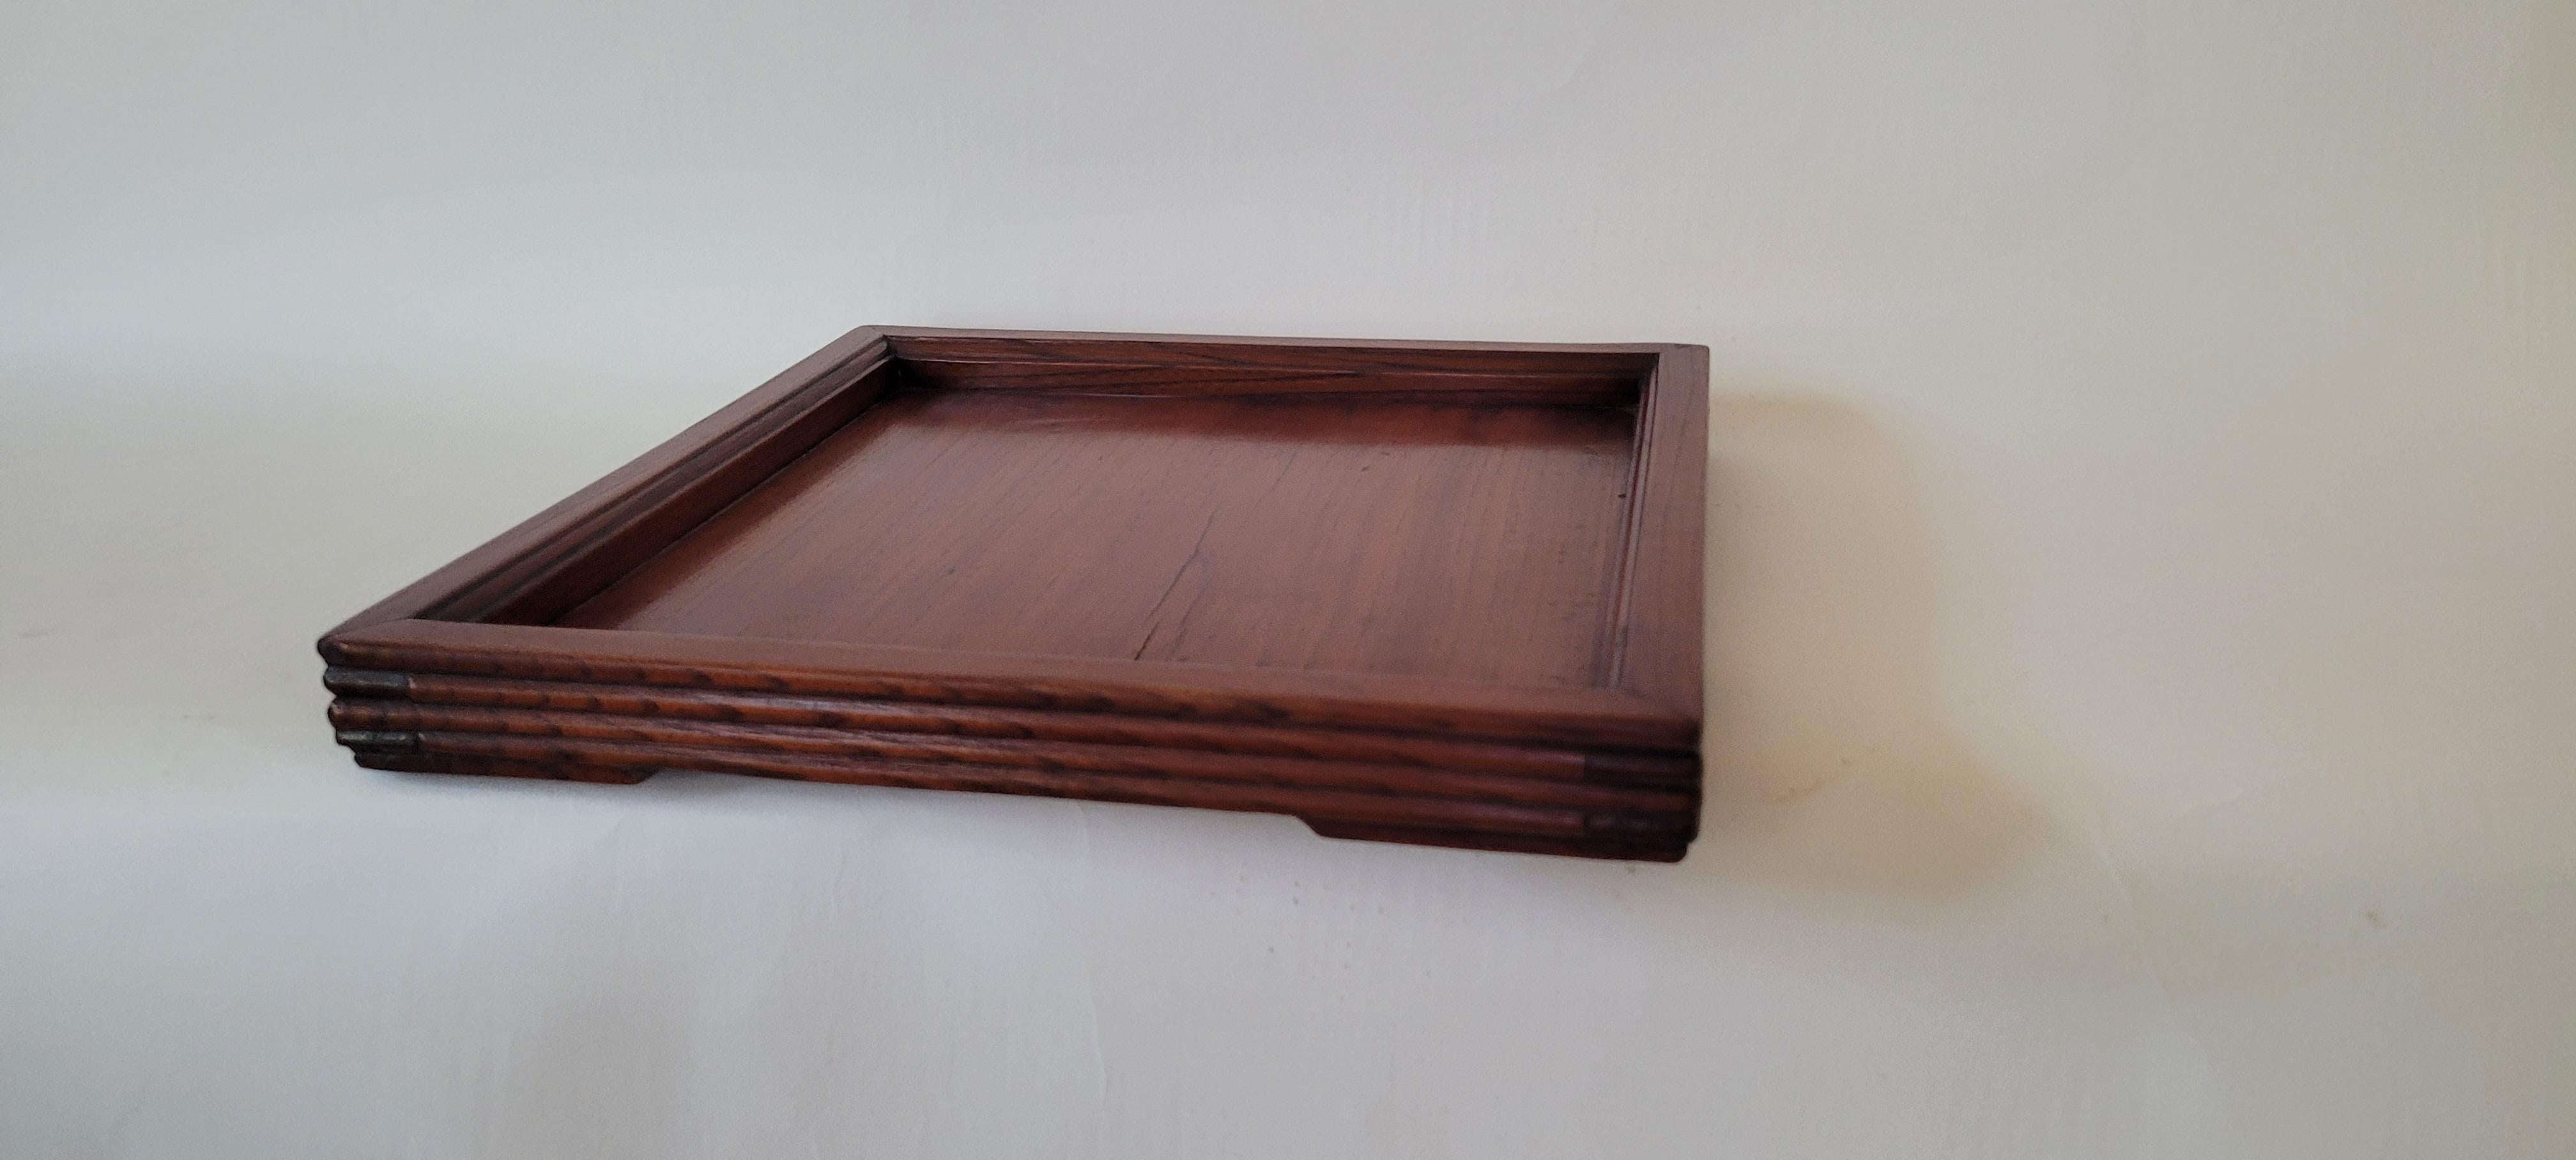 Tray
This is a square tea tray with beveled frame members and corner small base.

Material:	Jumu (Southern Elm)
Size:		1.5h x 12.75w x 12.75d
Origin:		Zhejiang
Age:		Late 19th Century
